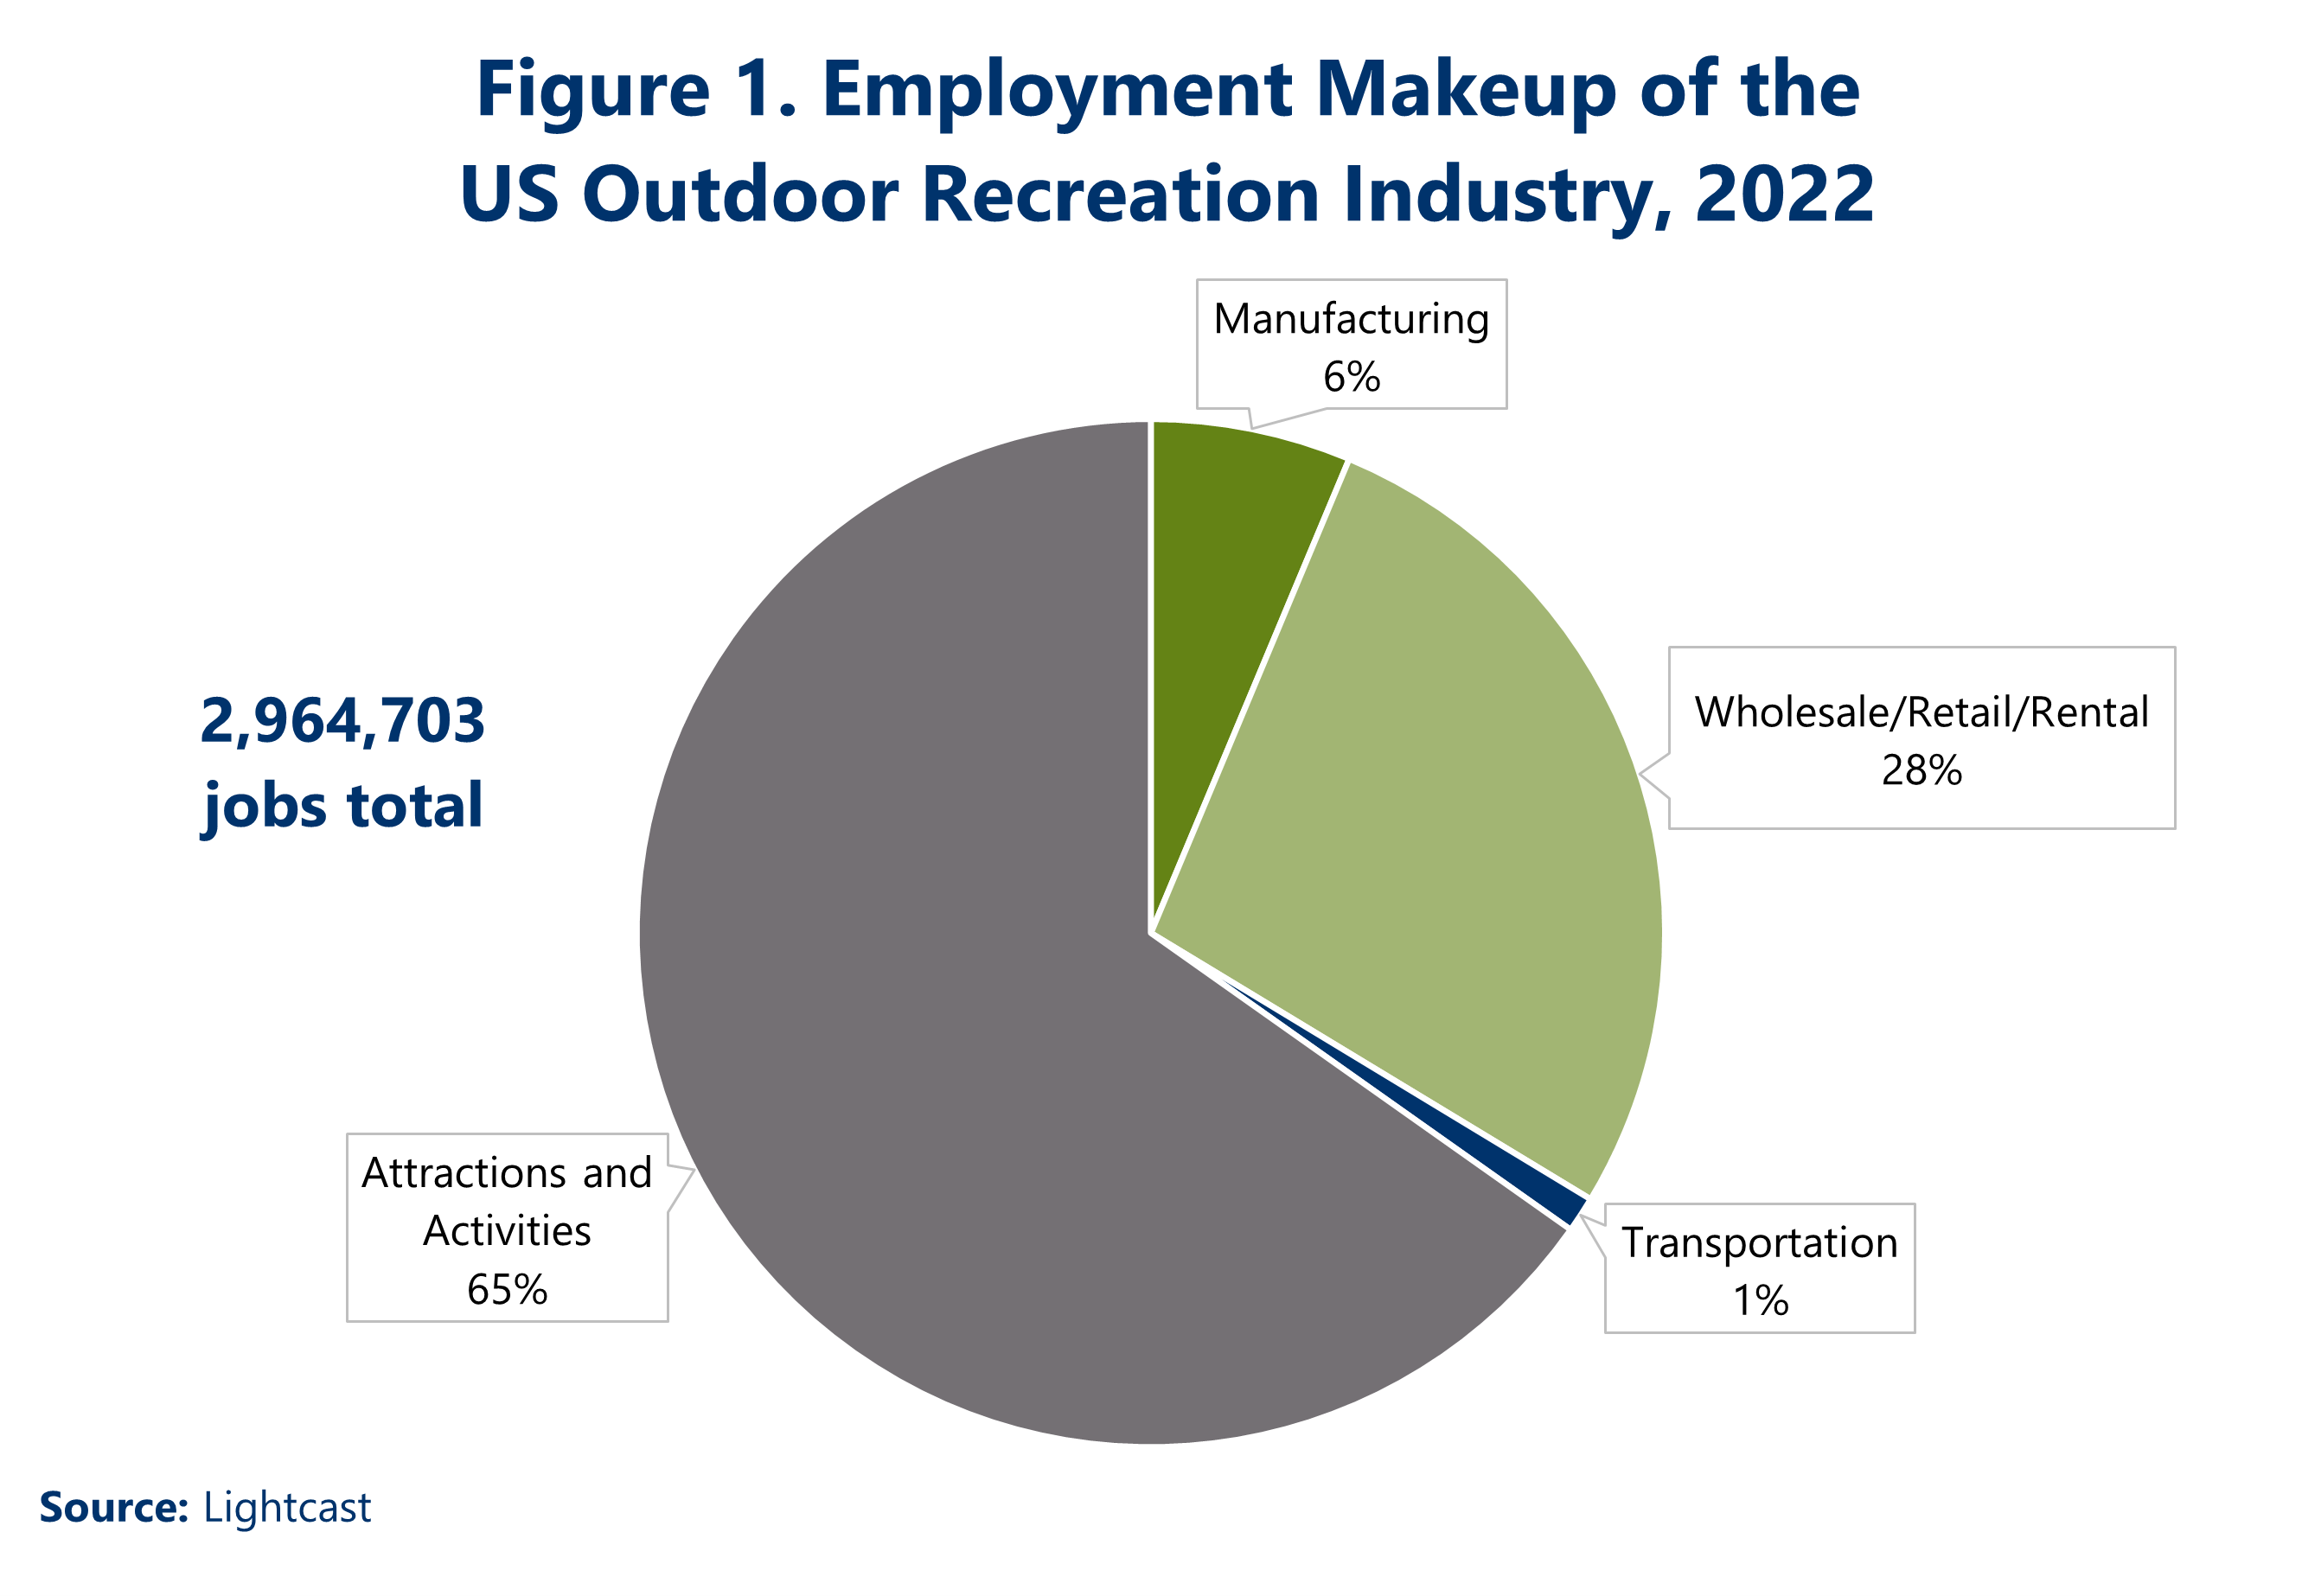 Figure 1. Employment makeup of the US Outdoor Recreation industry in 2022. Pie chart shows 2,964,703 jobs total, of which 65% were in attractions and activities, 28% were in wholesale/retail/rental, 6% were in manufacturing, and 1% were in transportation. Source: Lightcast